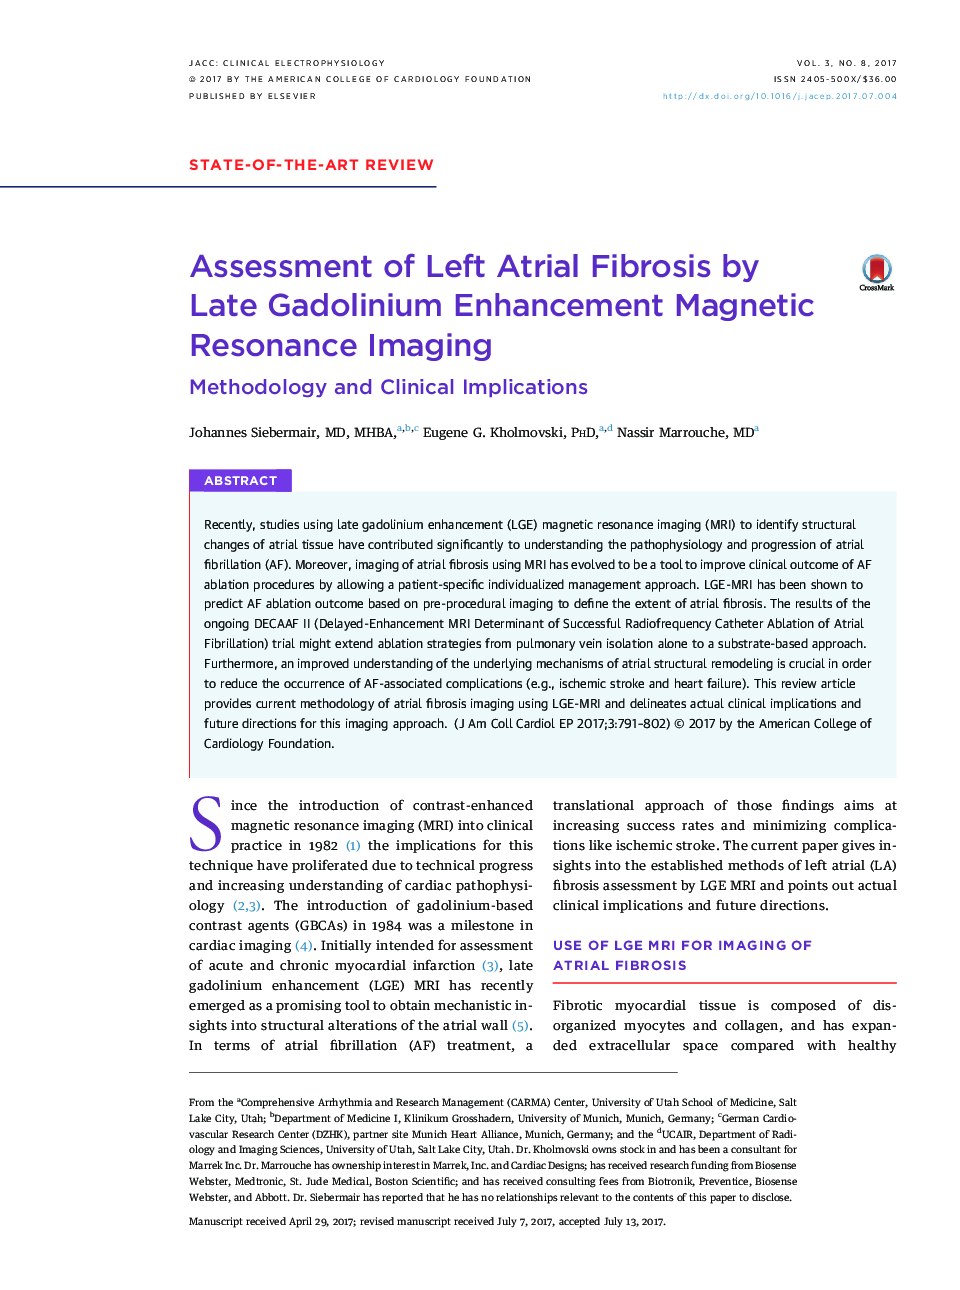 Assessment of Left Atrial Fibrosis by LateÂ Gadolinium Enhancement Magnetic Resonance Imaging